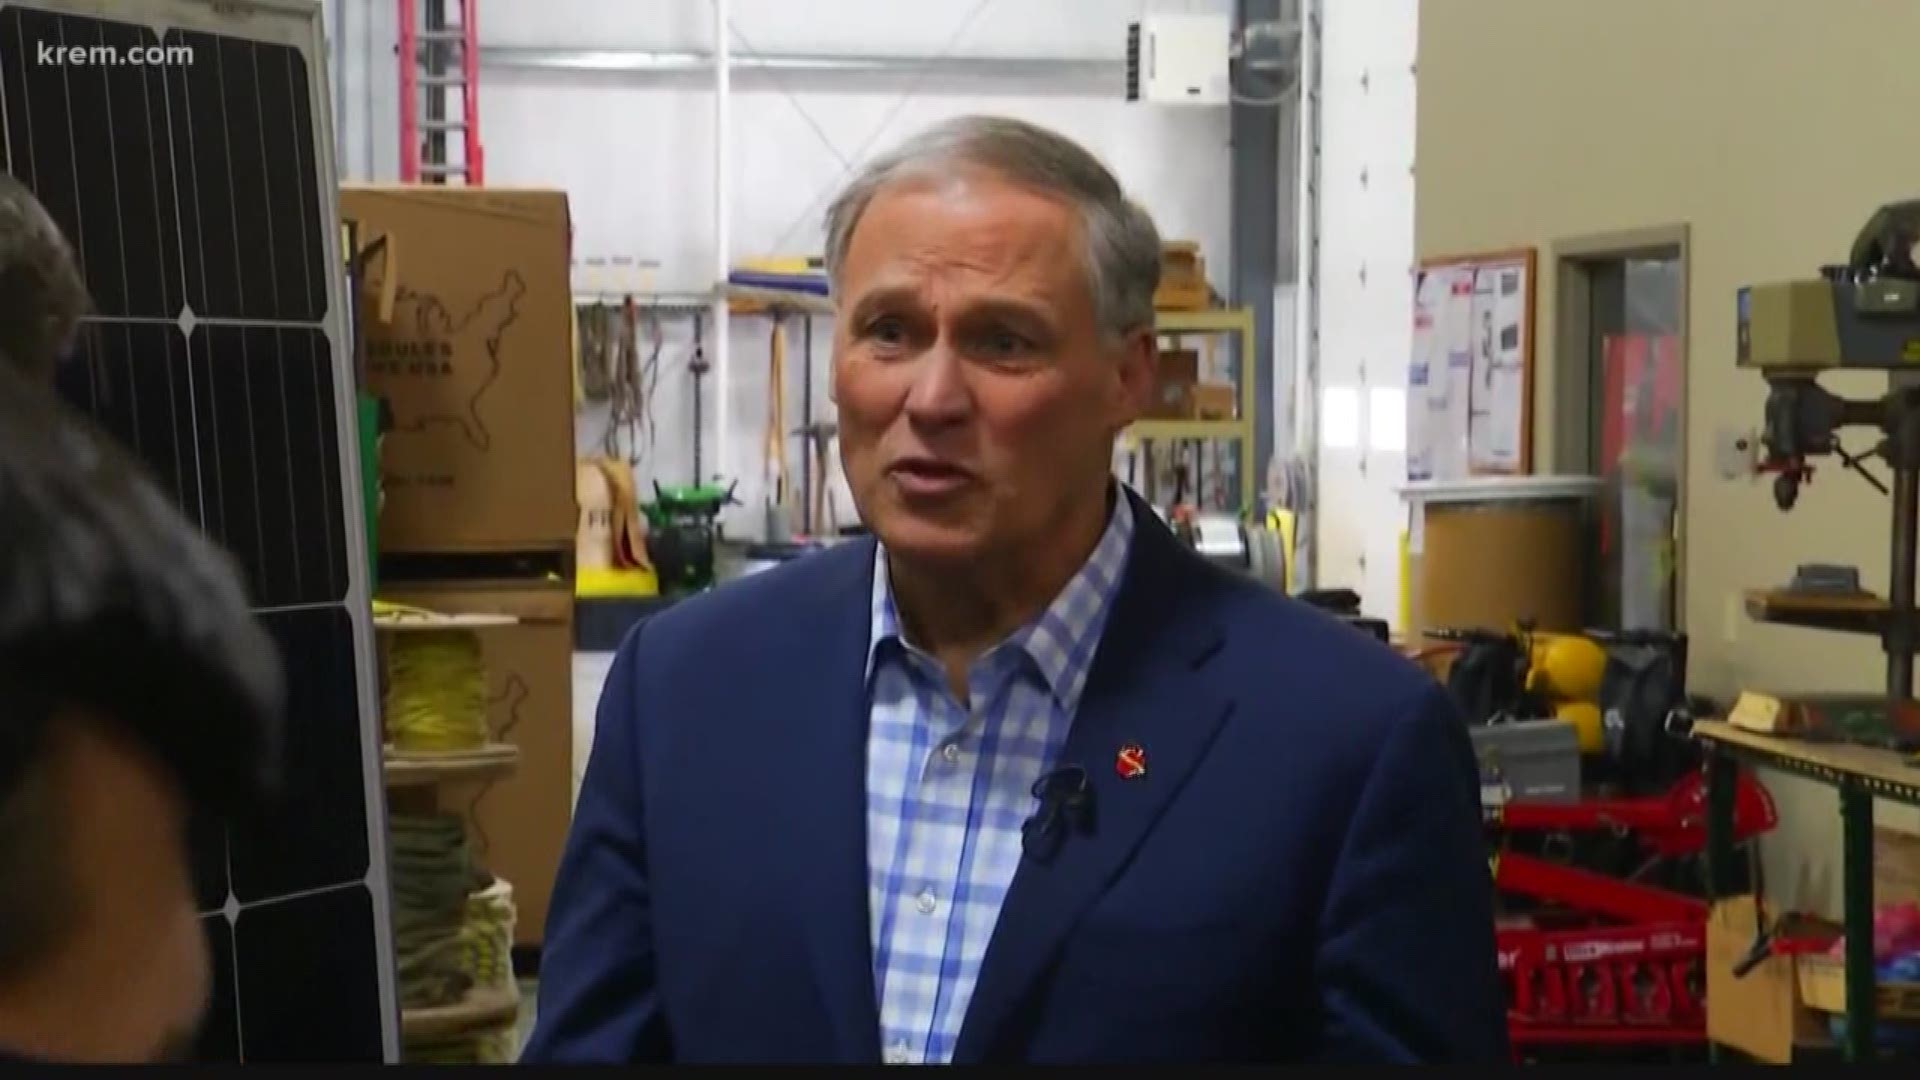 Washington State Patrol is requesting funds to add more members to Gov. Inslee's protection detail after he announced his run for president. If Inslee stays in the race for long run, the overall budget for his protection could jump from $2.6 million to $5.3 million in 2020, more than double the current cost to taxpayers.